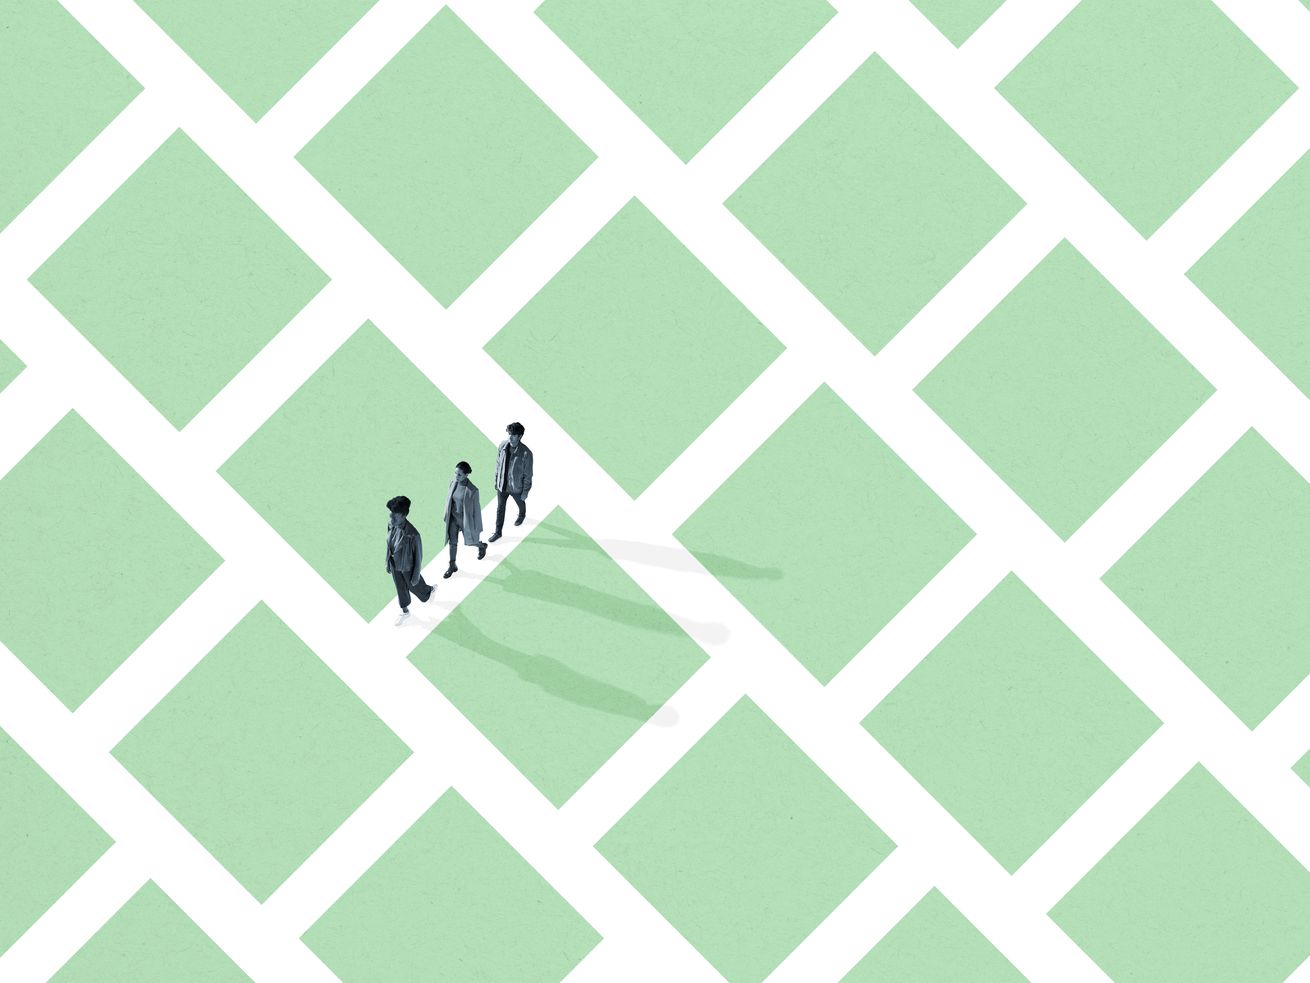 Illustration of three tiny figures walking in a line on a vast grid.